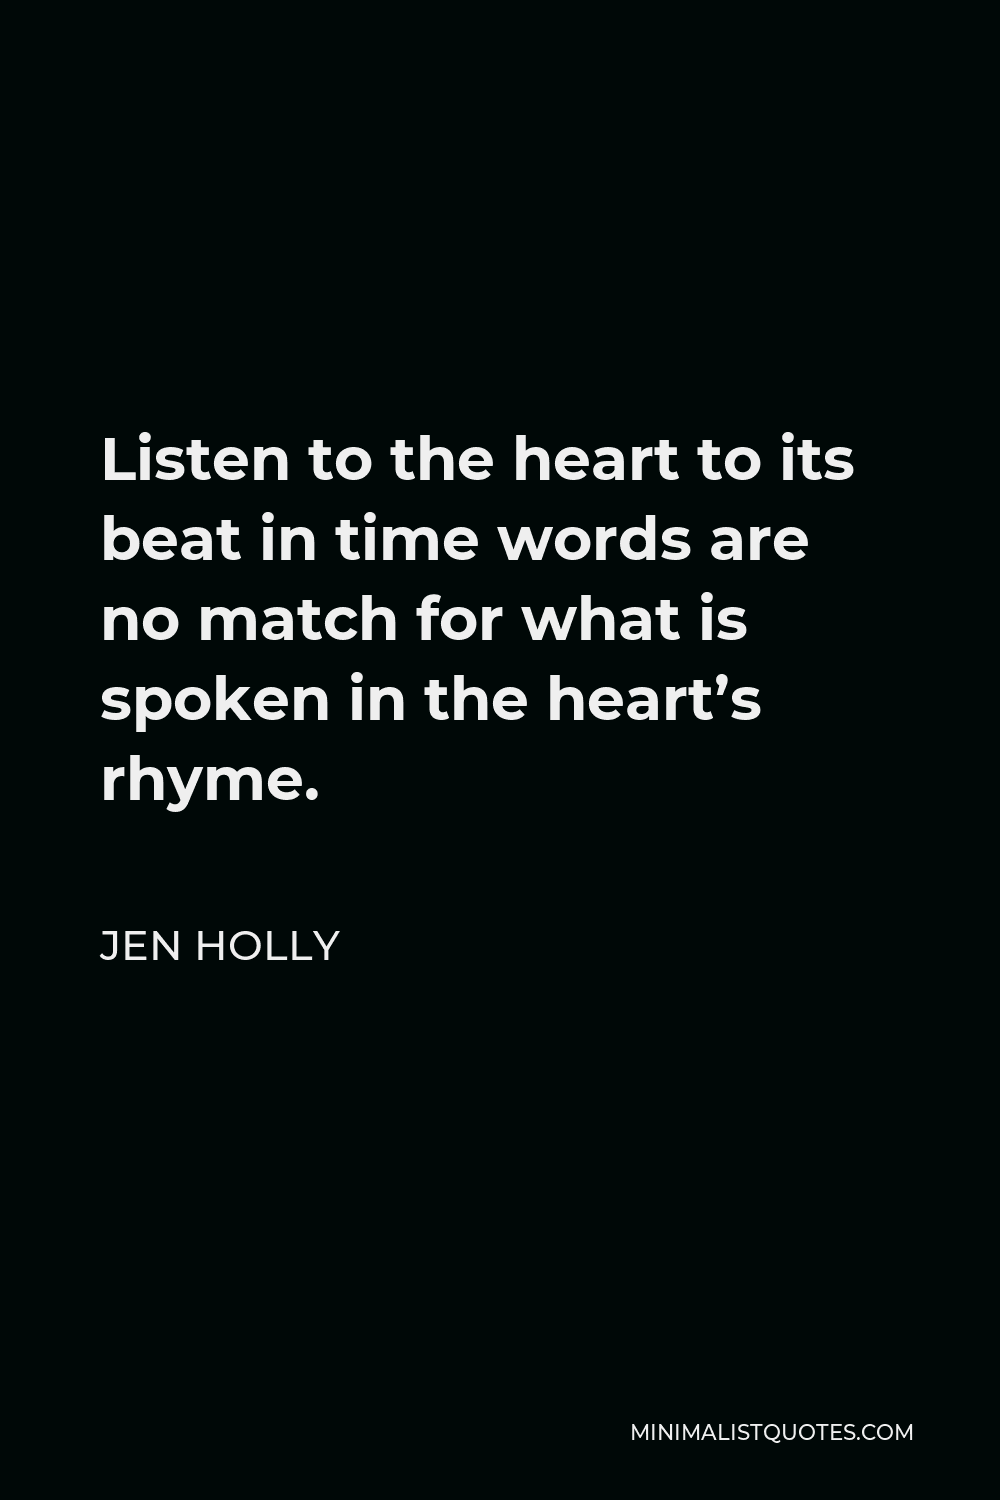 Jen Holly Quote - Listen to the heart to its beat in time words are no match for what is spoken in the heart’s rhyme.